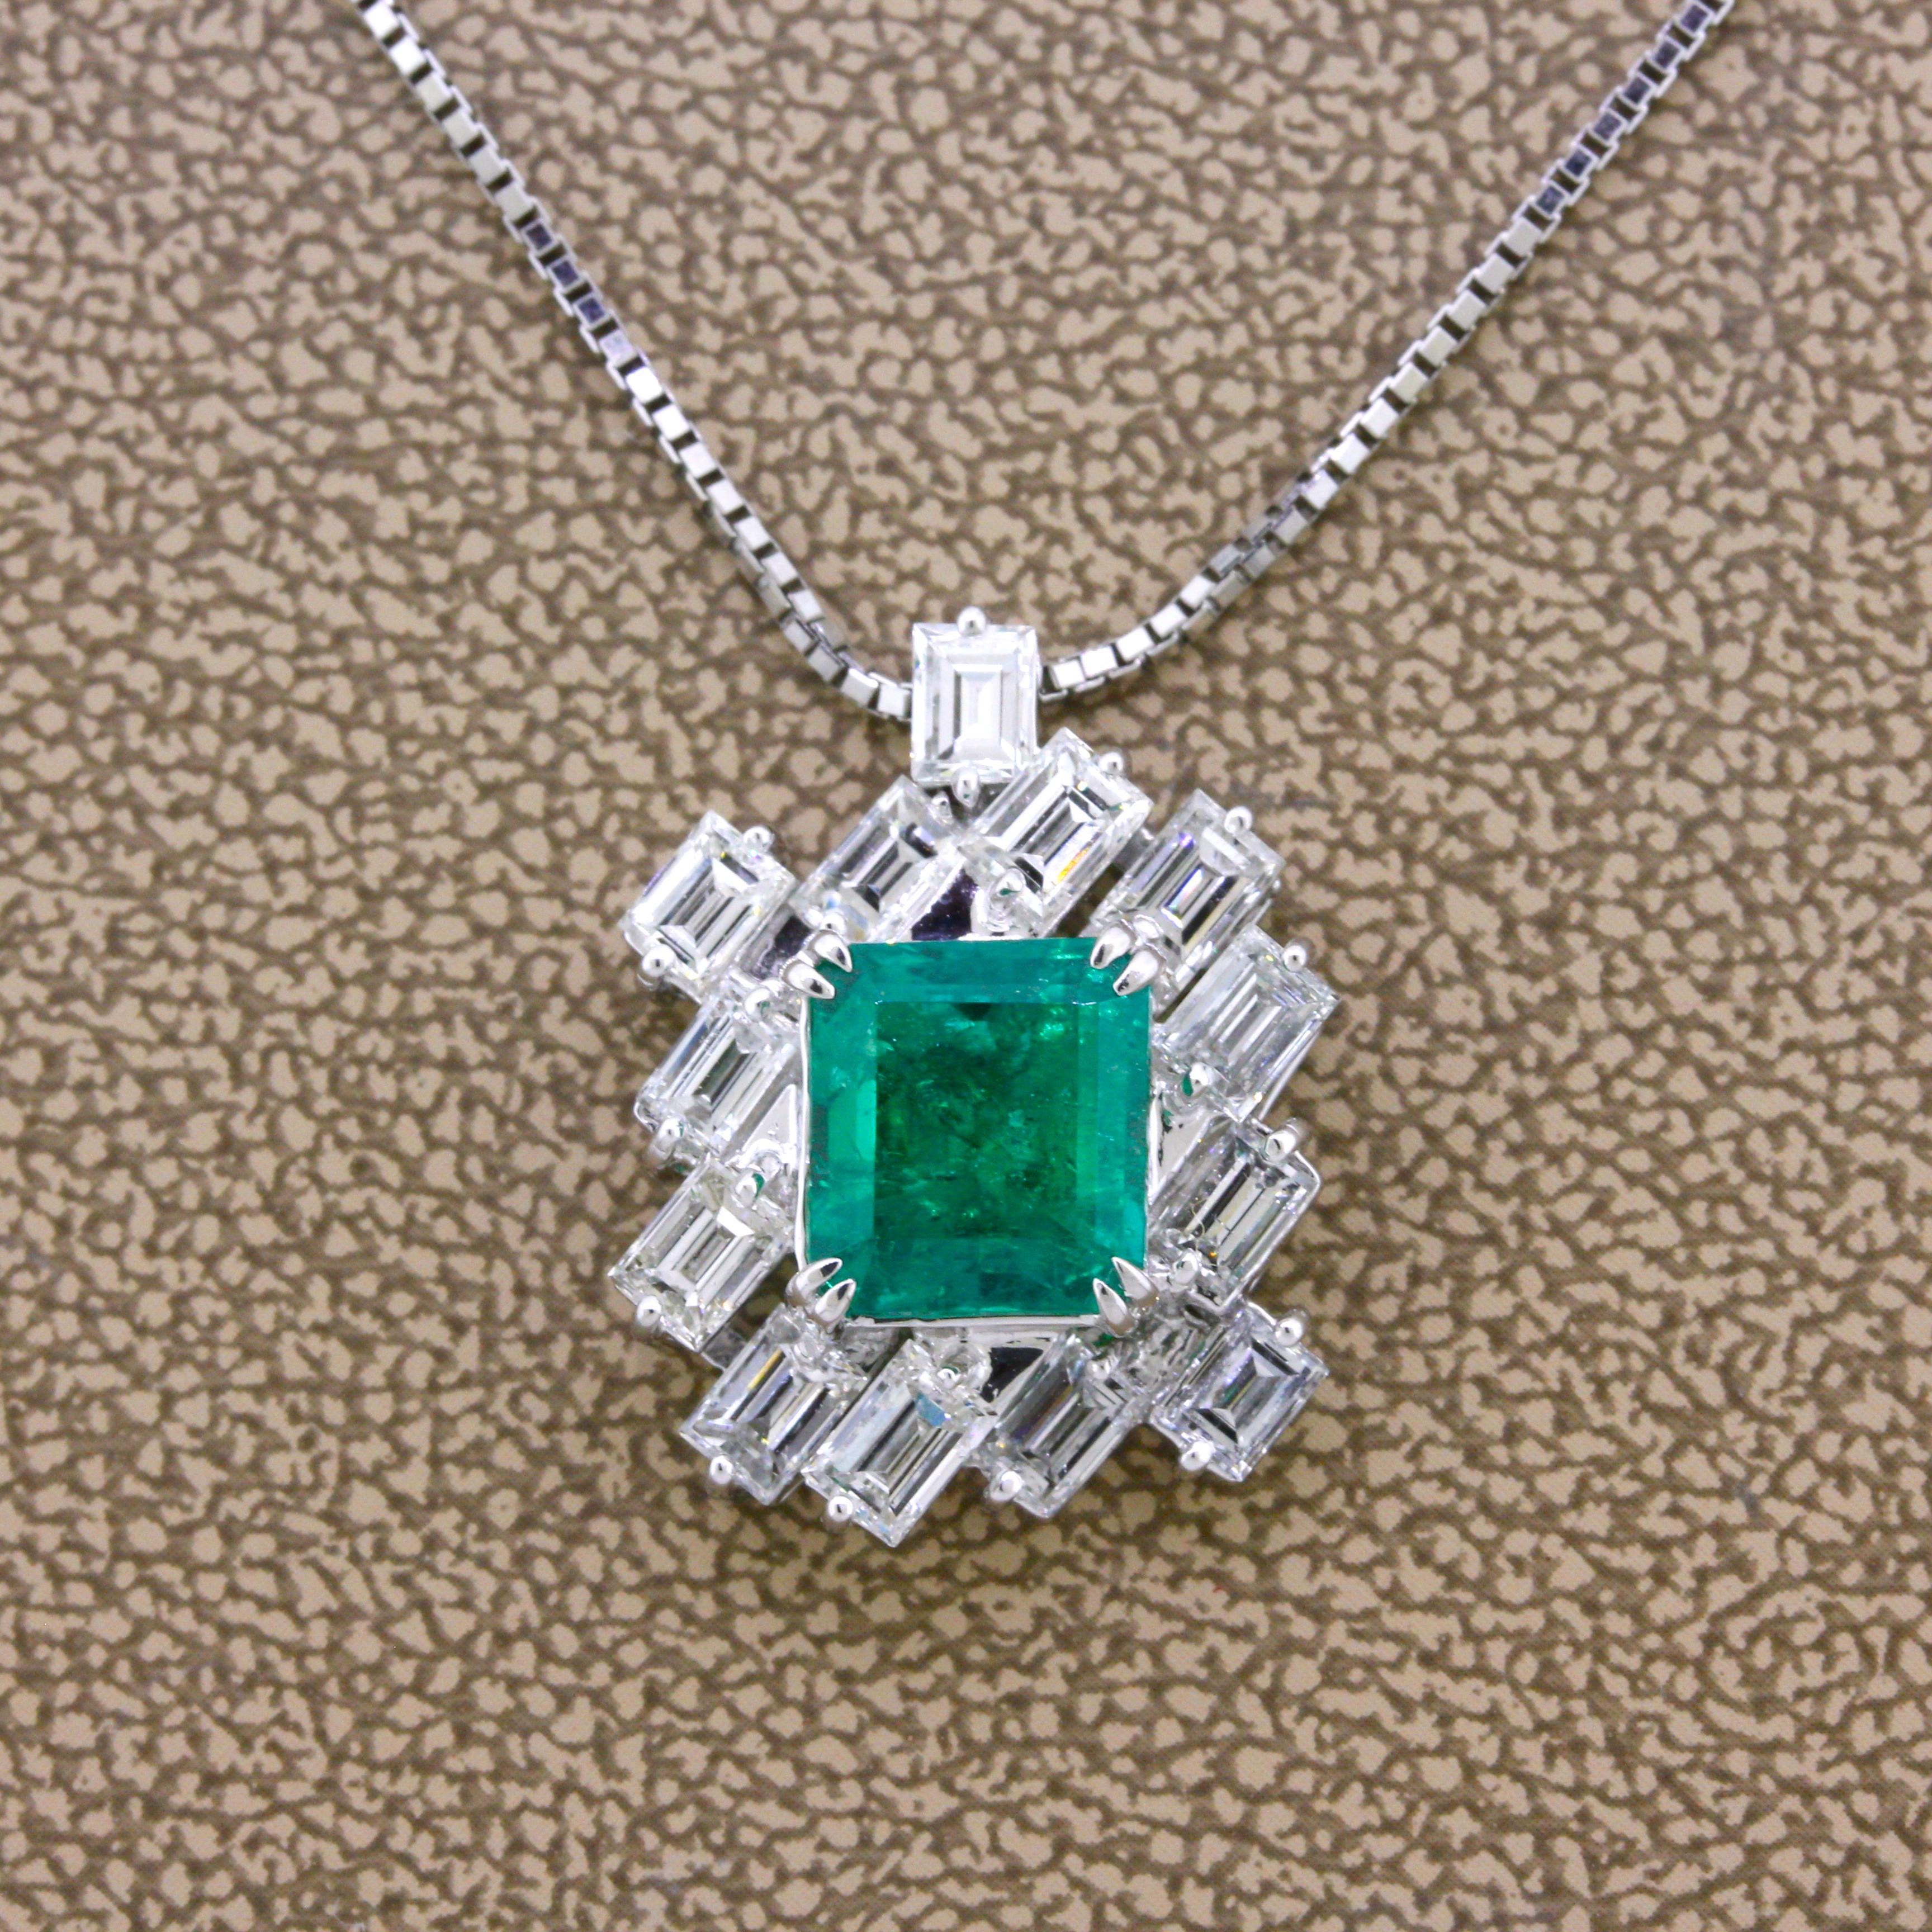 An exceptional emerald weighing just shy of 3 carats (2.97) takes center stage of this dazzling piece. The emerald has a rich vivid grass green color along with excellent brightness which makes this gem special. Due to the fine color and quality of